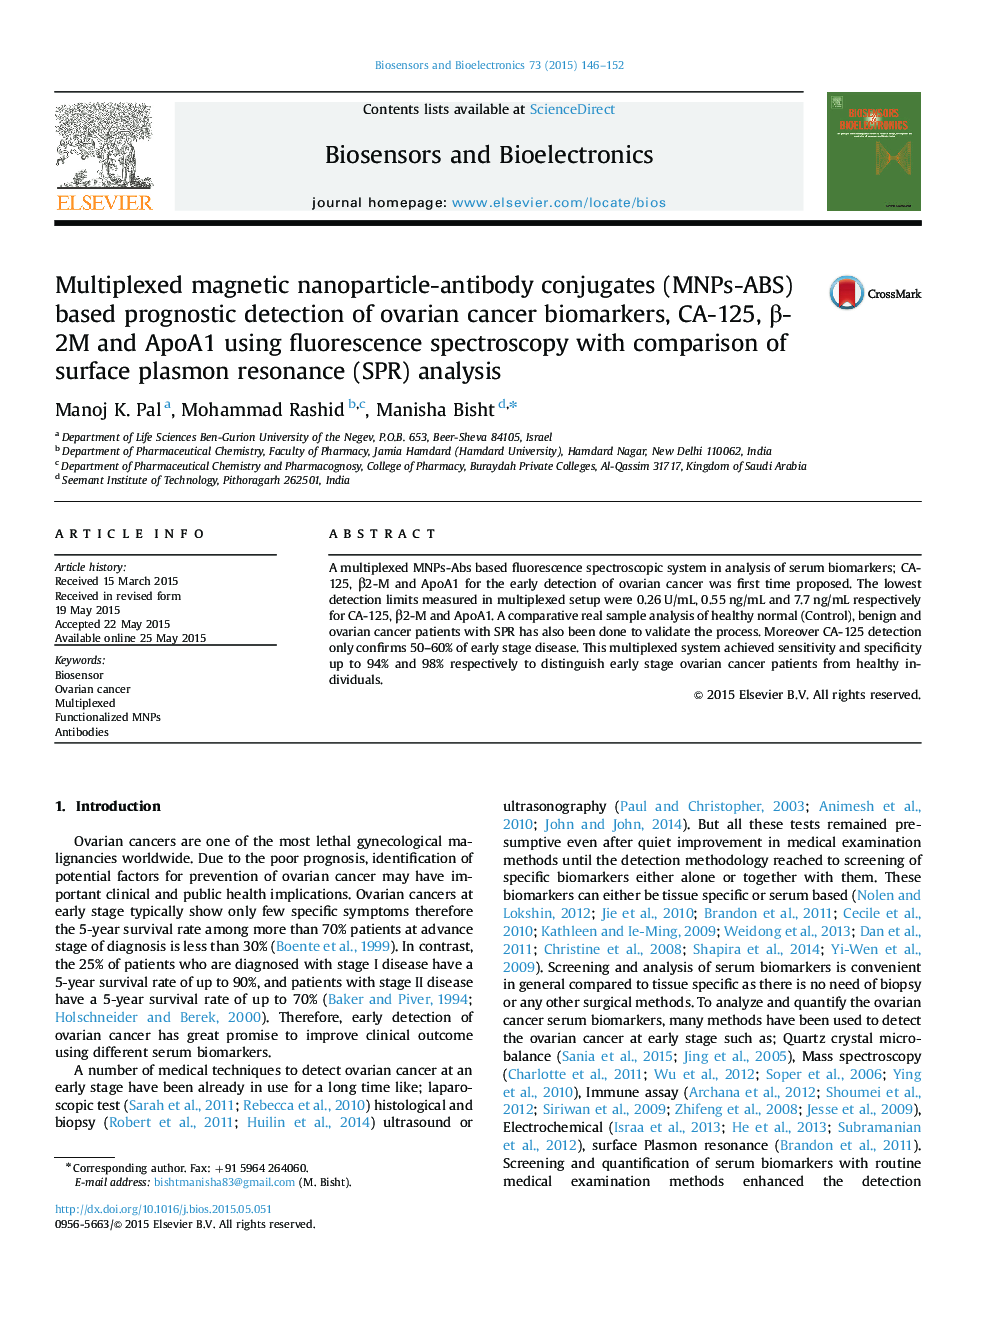 Multiplexed magnetic nanoparticle-antibody conjugates (MNPs-ABS) based prognostic detection of ovarian cancer biomarkers, CA-125, Î²-2M and ApoA1 using fluorescence spectroscopy with comparison of surface plasmon resonance (SPR) analysis